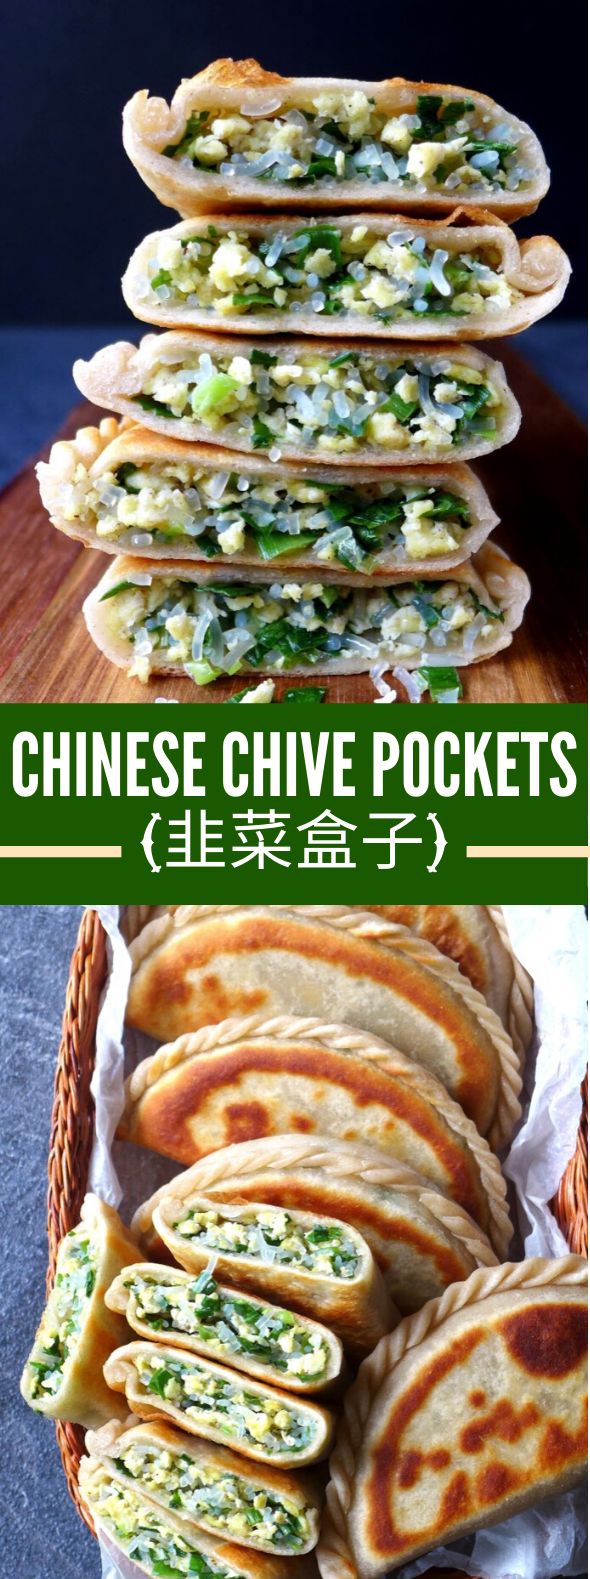 CHINESE CHIVE POCKETS (韭菜盒子) #vegetarian #appetizers